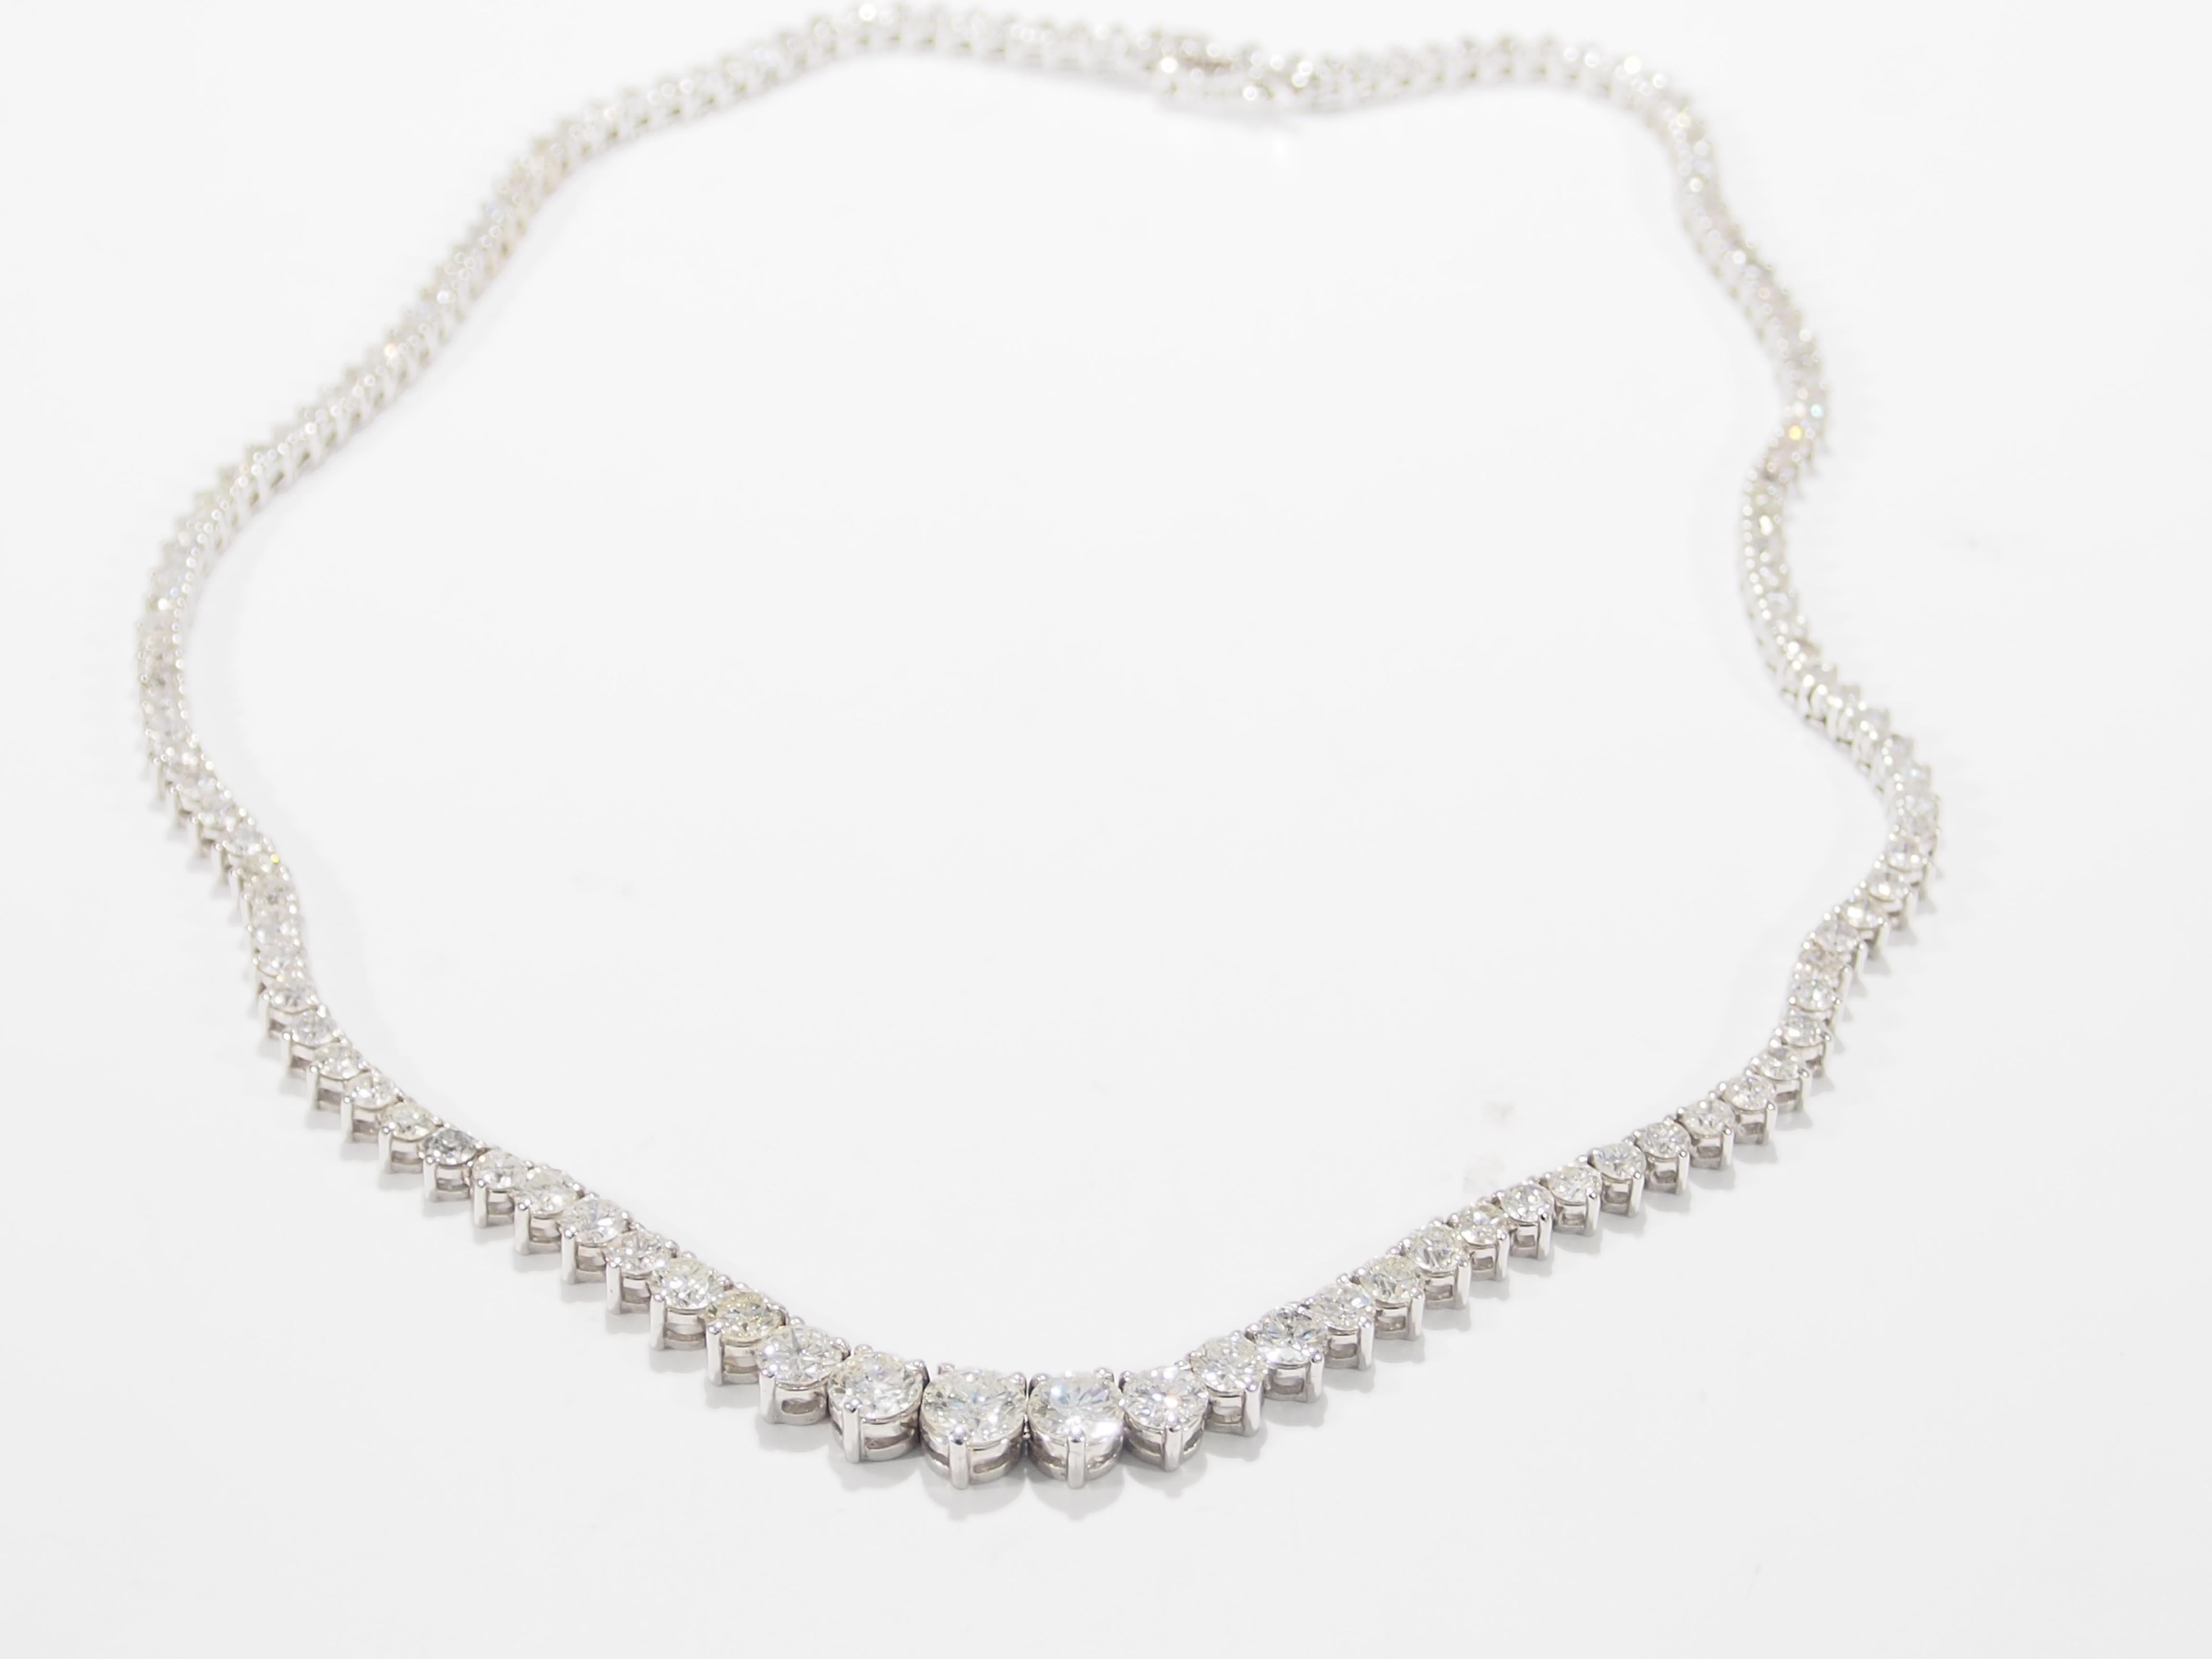 This is a luxurious 14K White Gold Diamond Tennis Necklace. A stunning Necklace with 135 Round Brilliant Cut Diamonds, approximately 11.42ctw, F-J in Color, VS-I1 in Clarity that graduates in size  from the center to the clasp. This divine Diamond